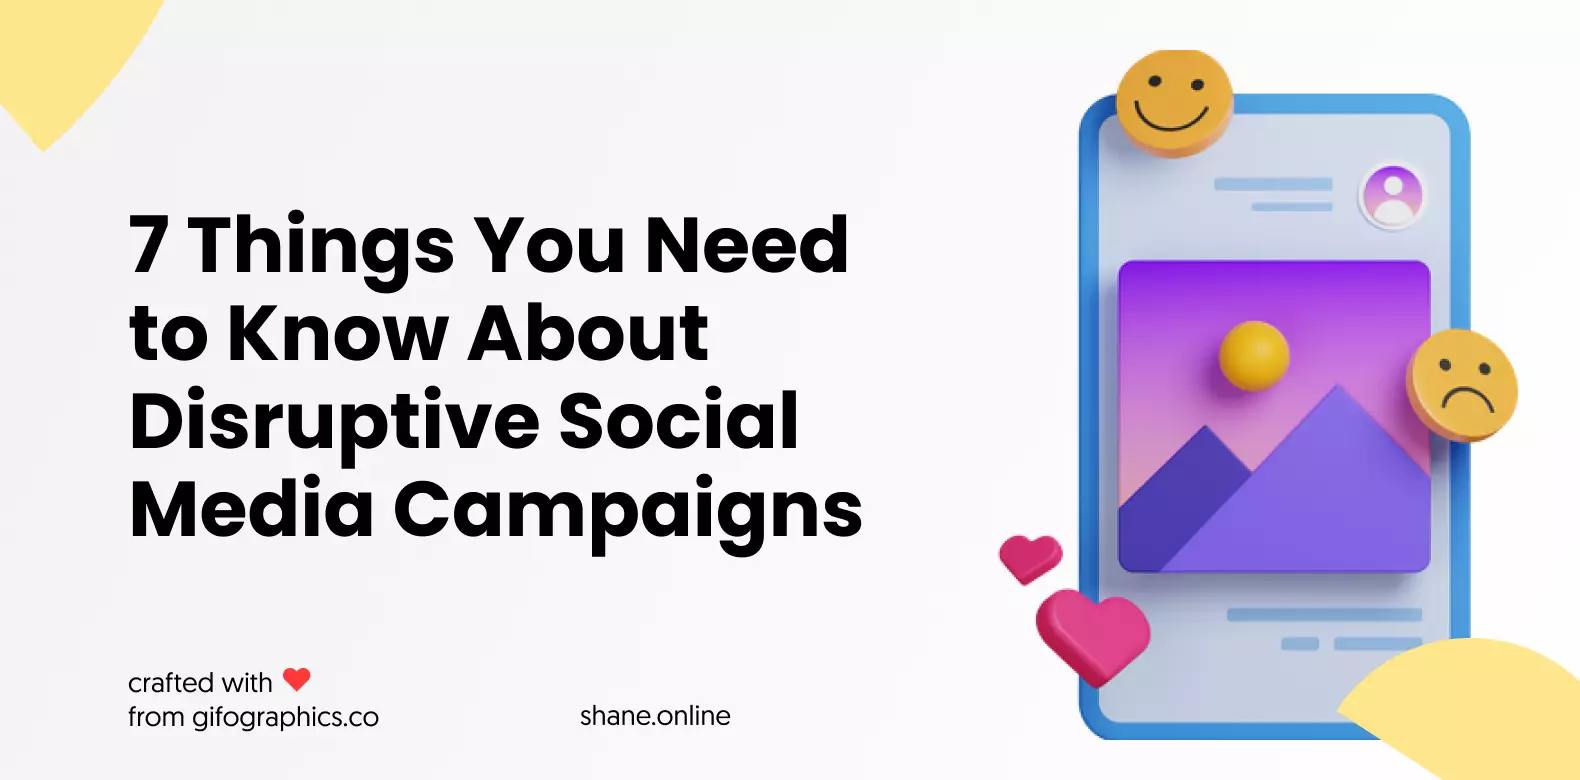 7 Things You Need to Know About Disruptive Social Media Campaigns